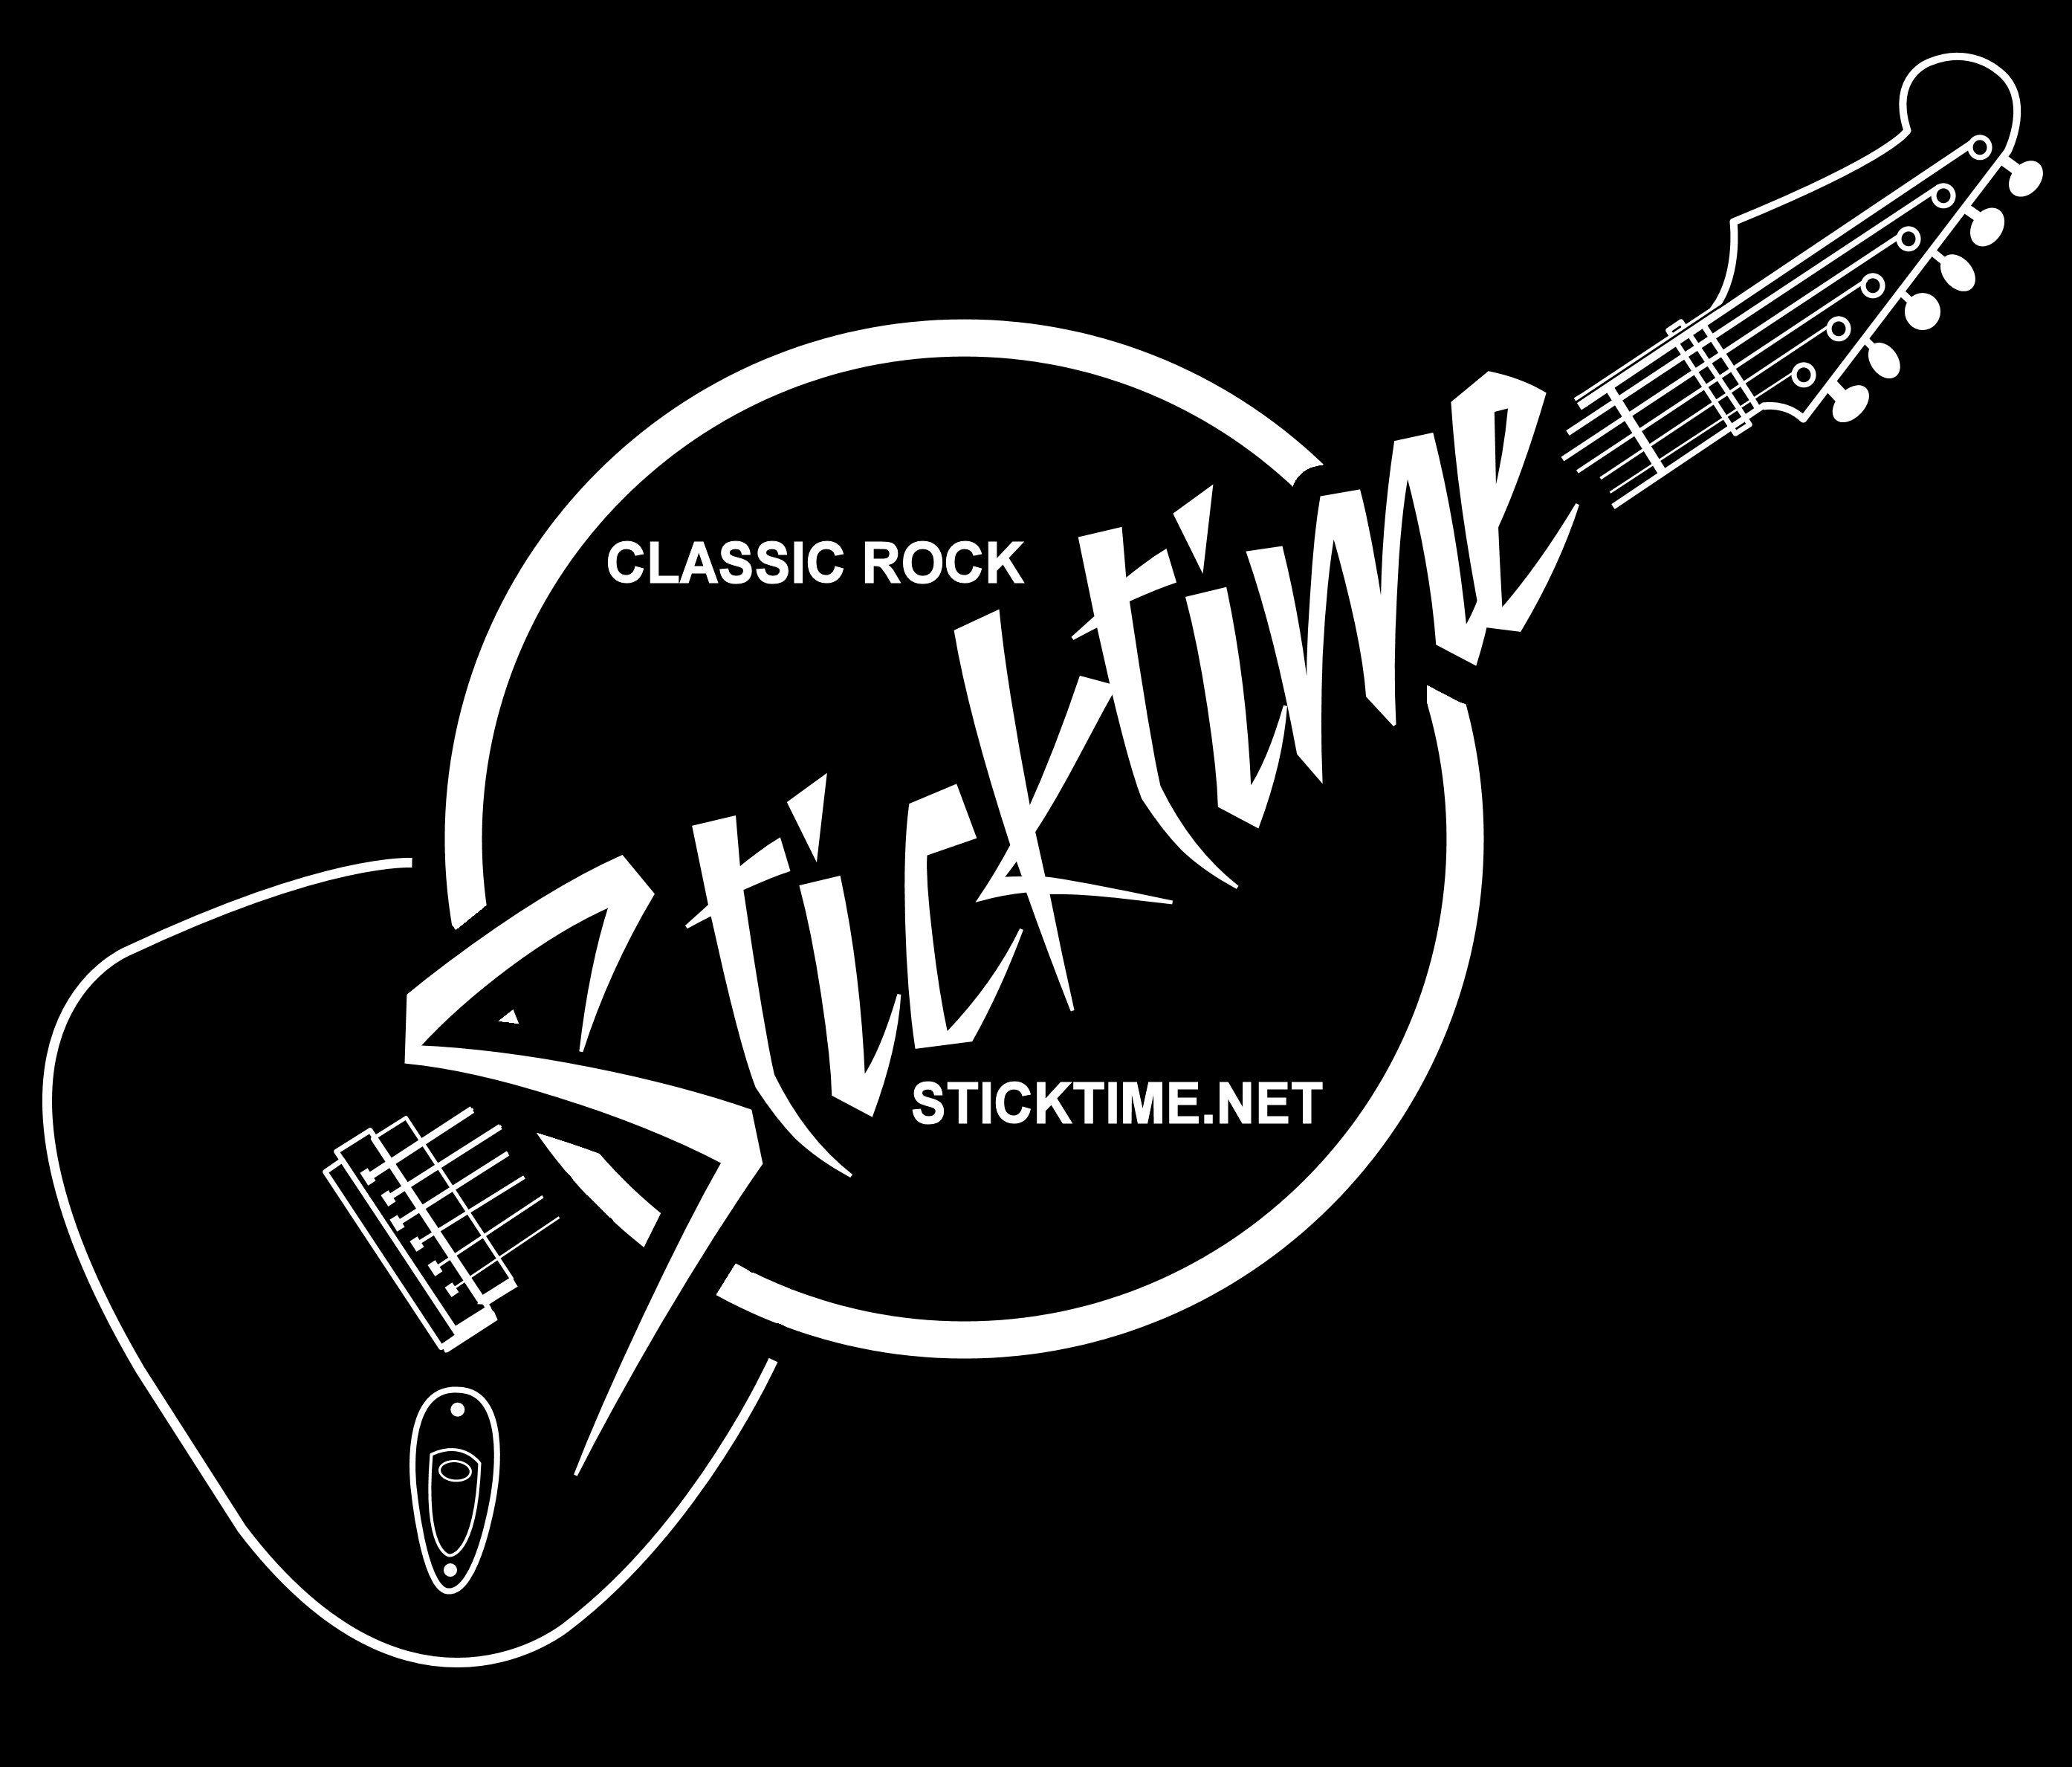 Classic Rock Band Logo - Sticktime Promotional Images - Frederick Maryland's Premier Classic ...